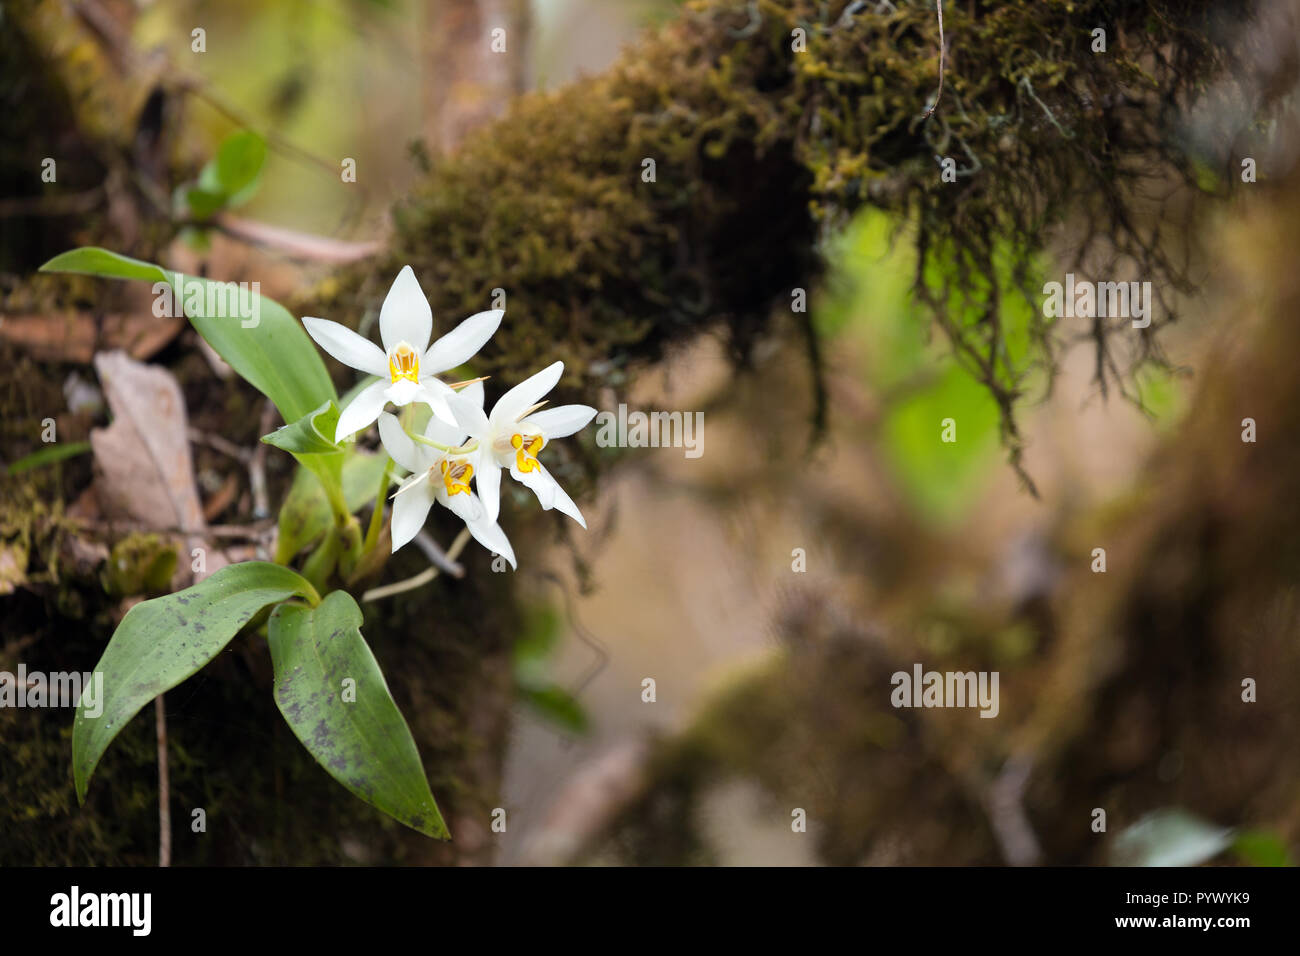 Wild white orchid flower (dendrobium christyanum) on tree branch in the Doi Inthanon national park, Thailand Stock Photo